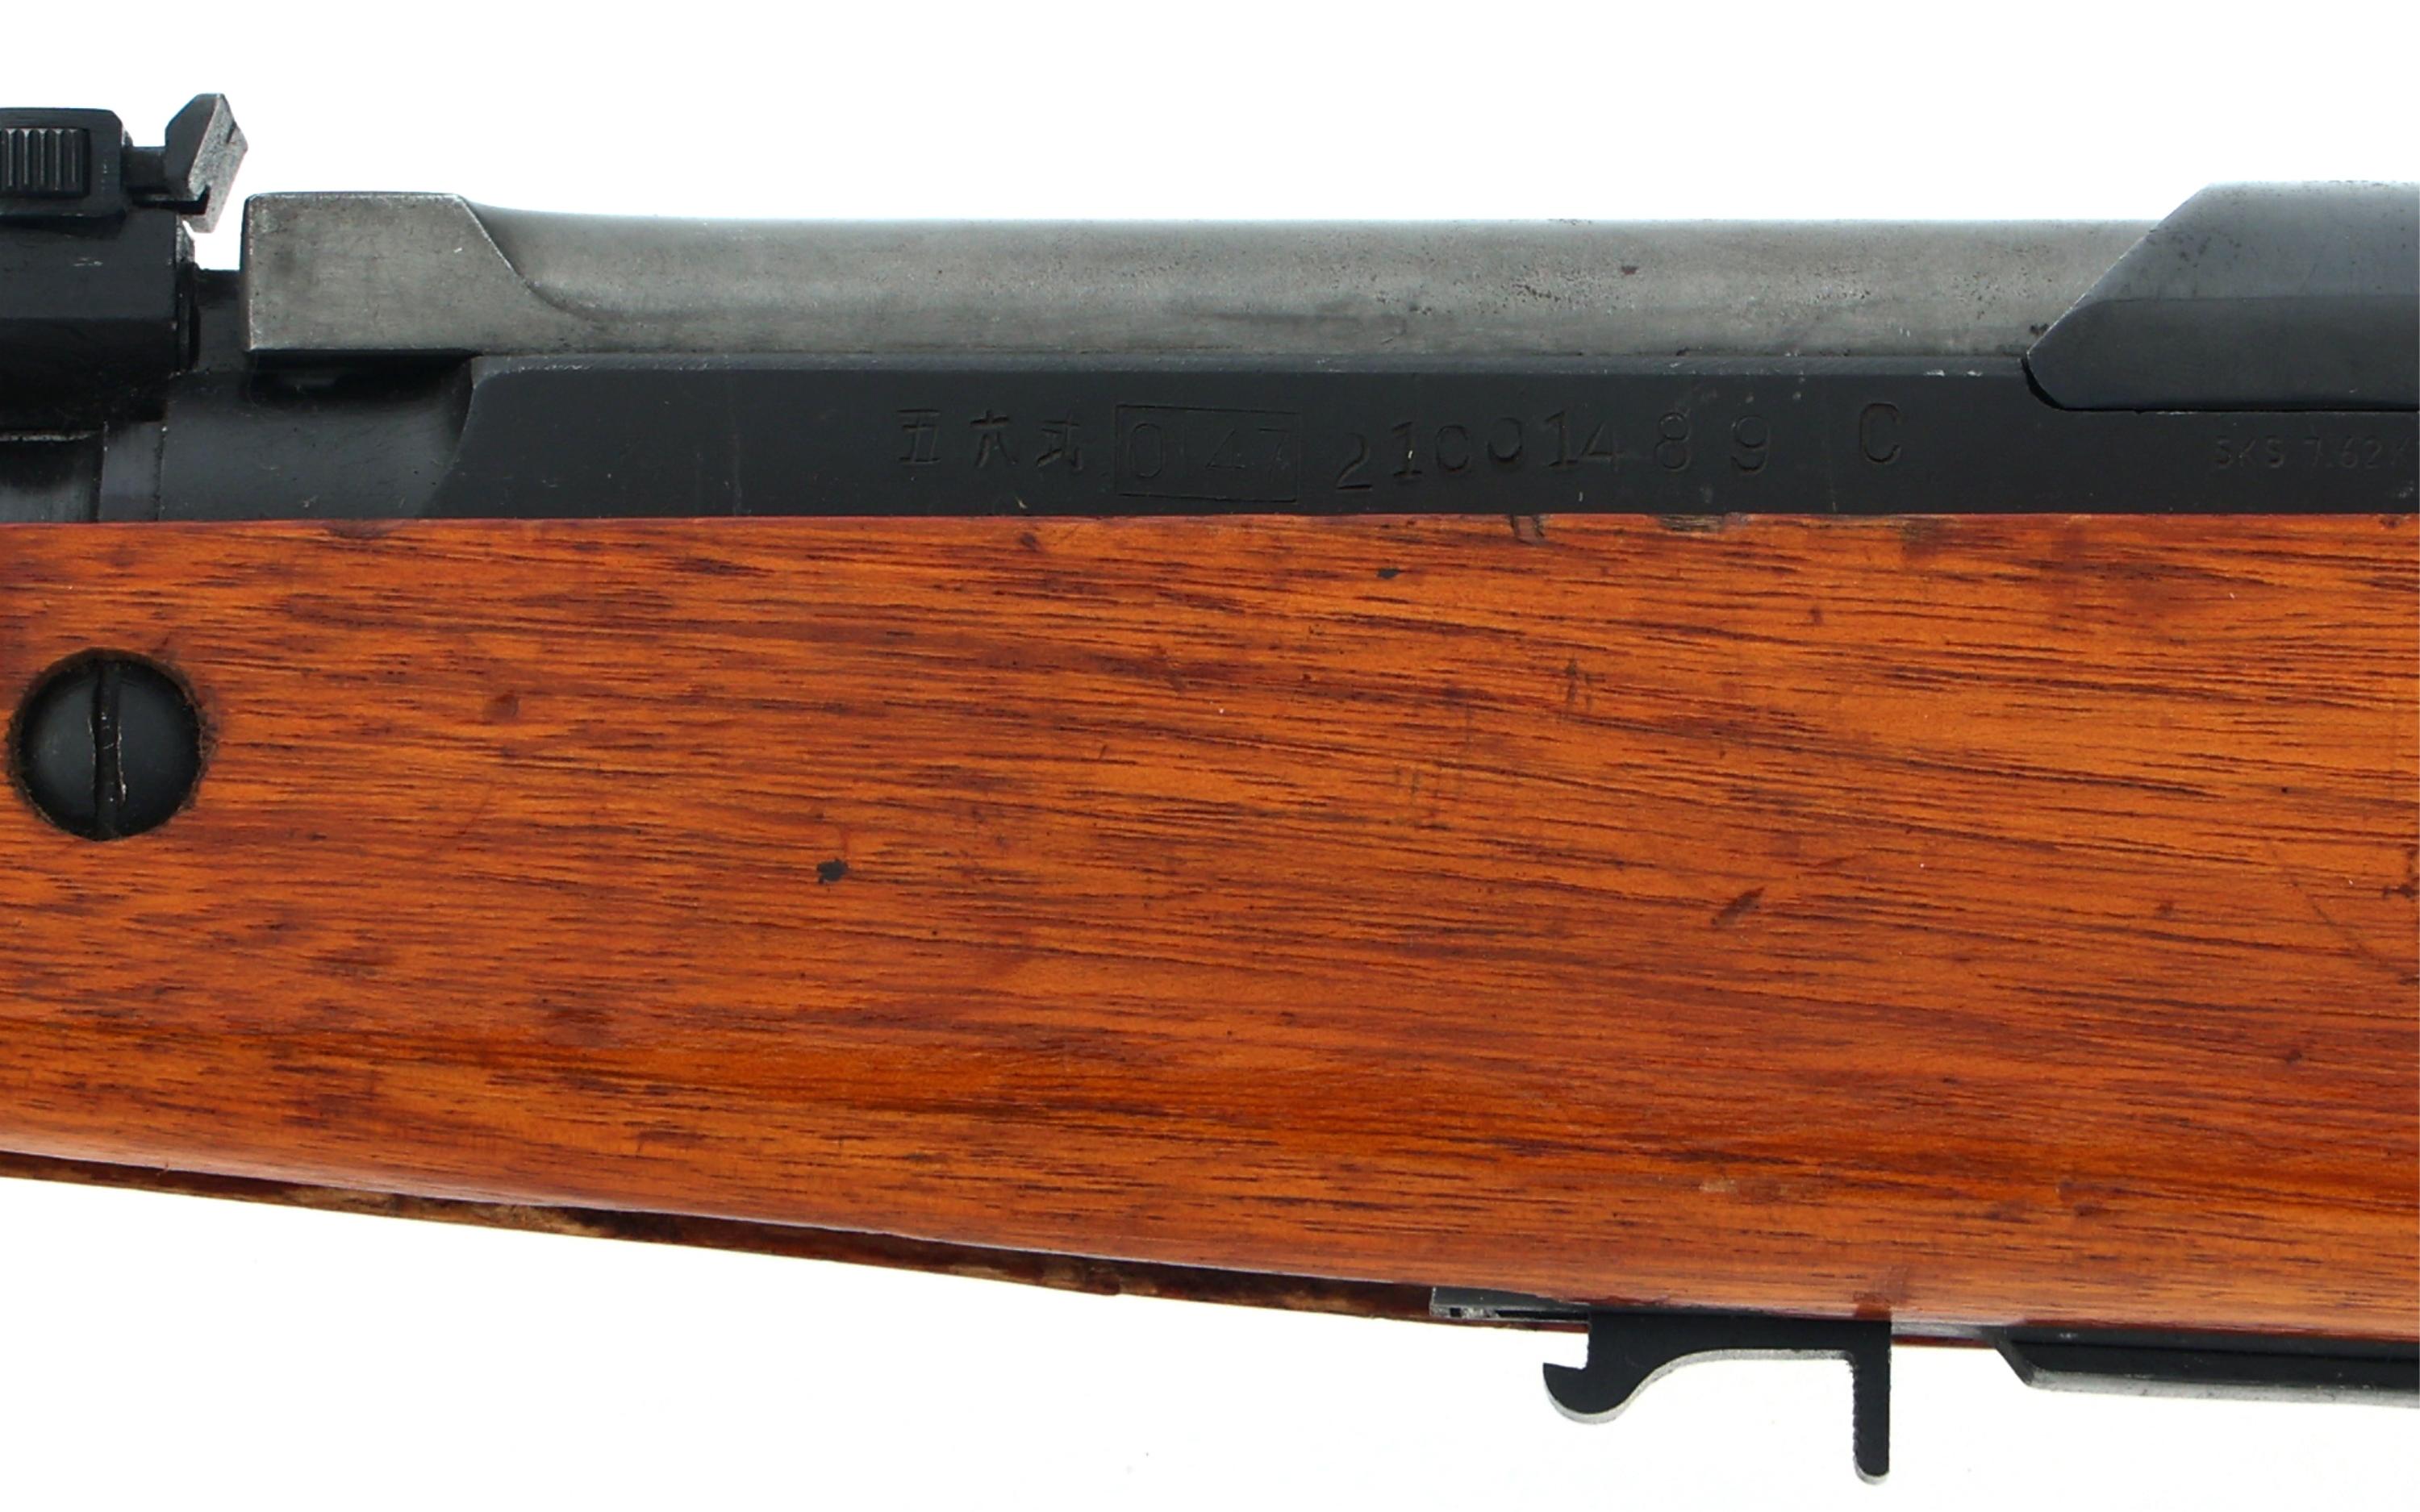 CHINESE NORINCO MODEL TYPE 56 7.62x39mm SKS RIFLE